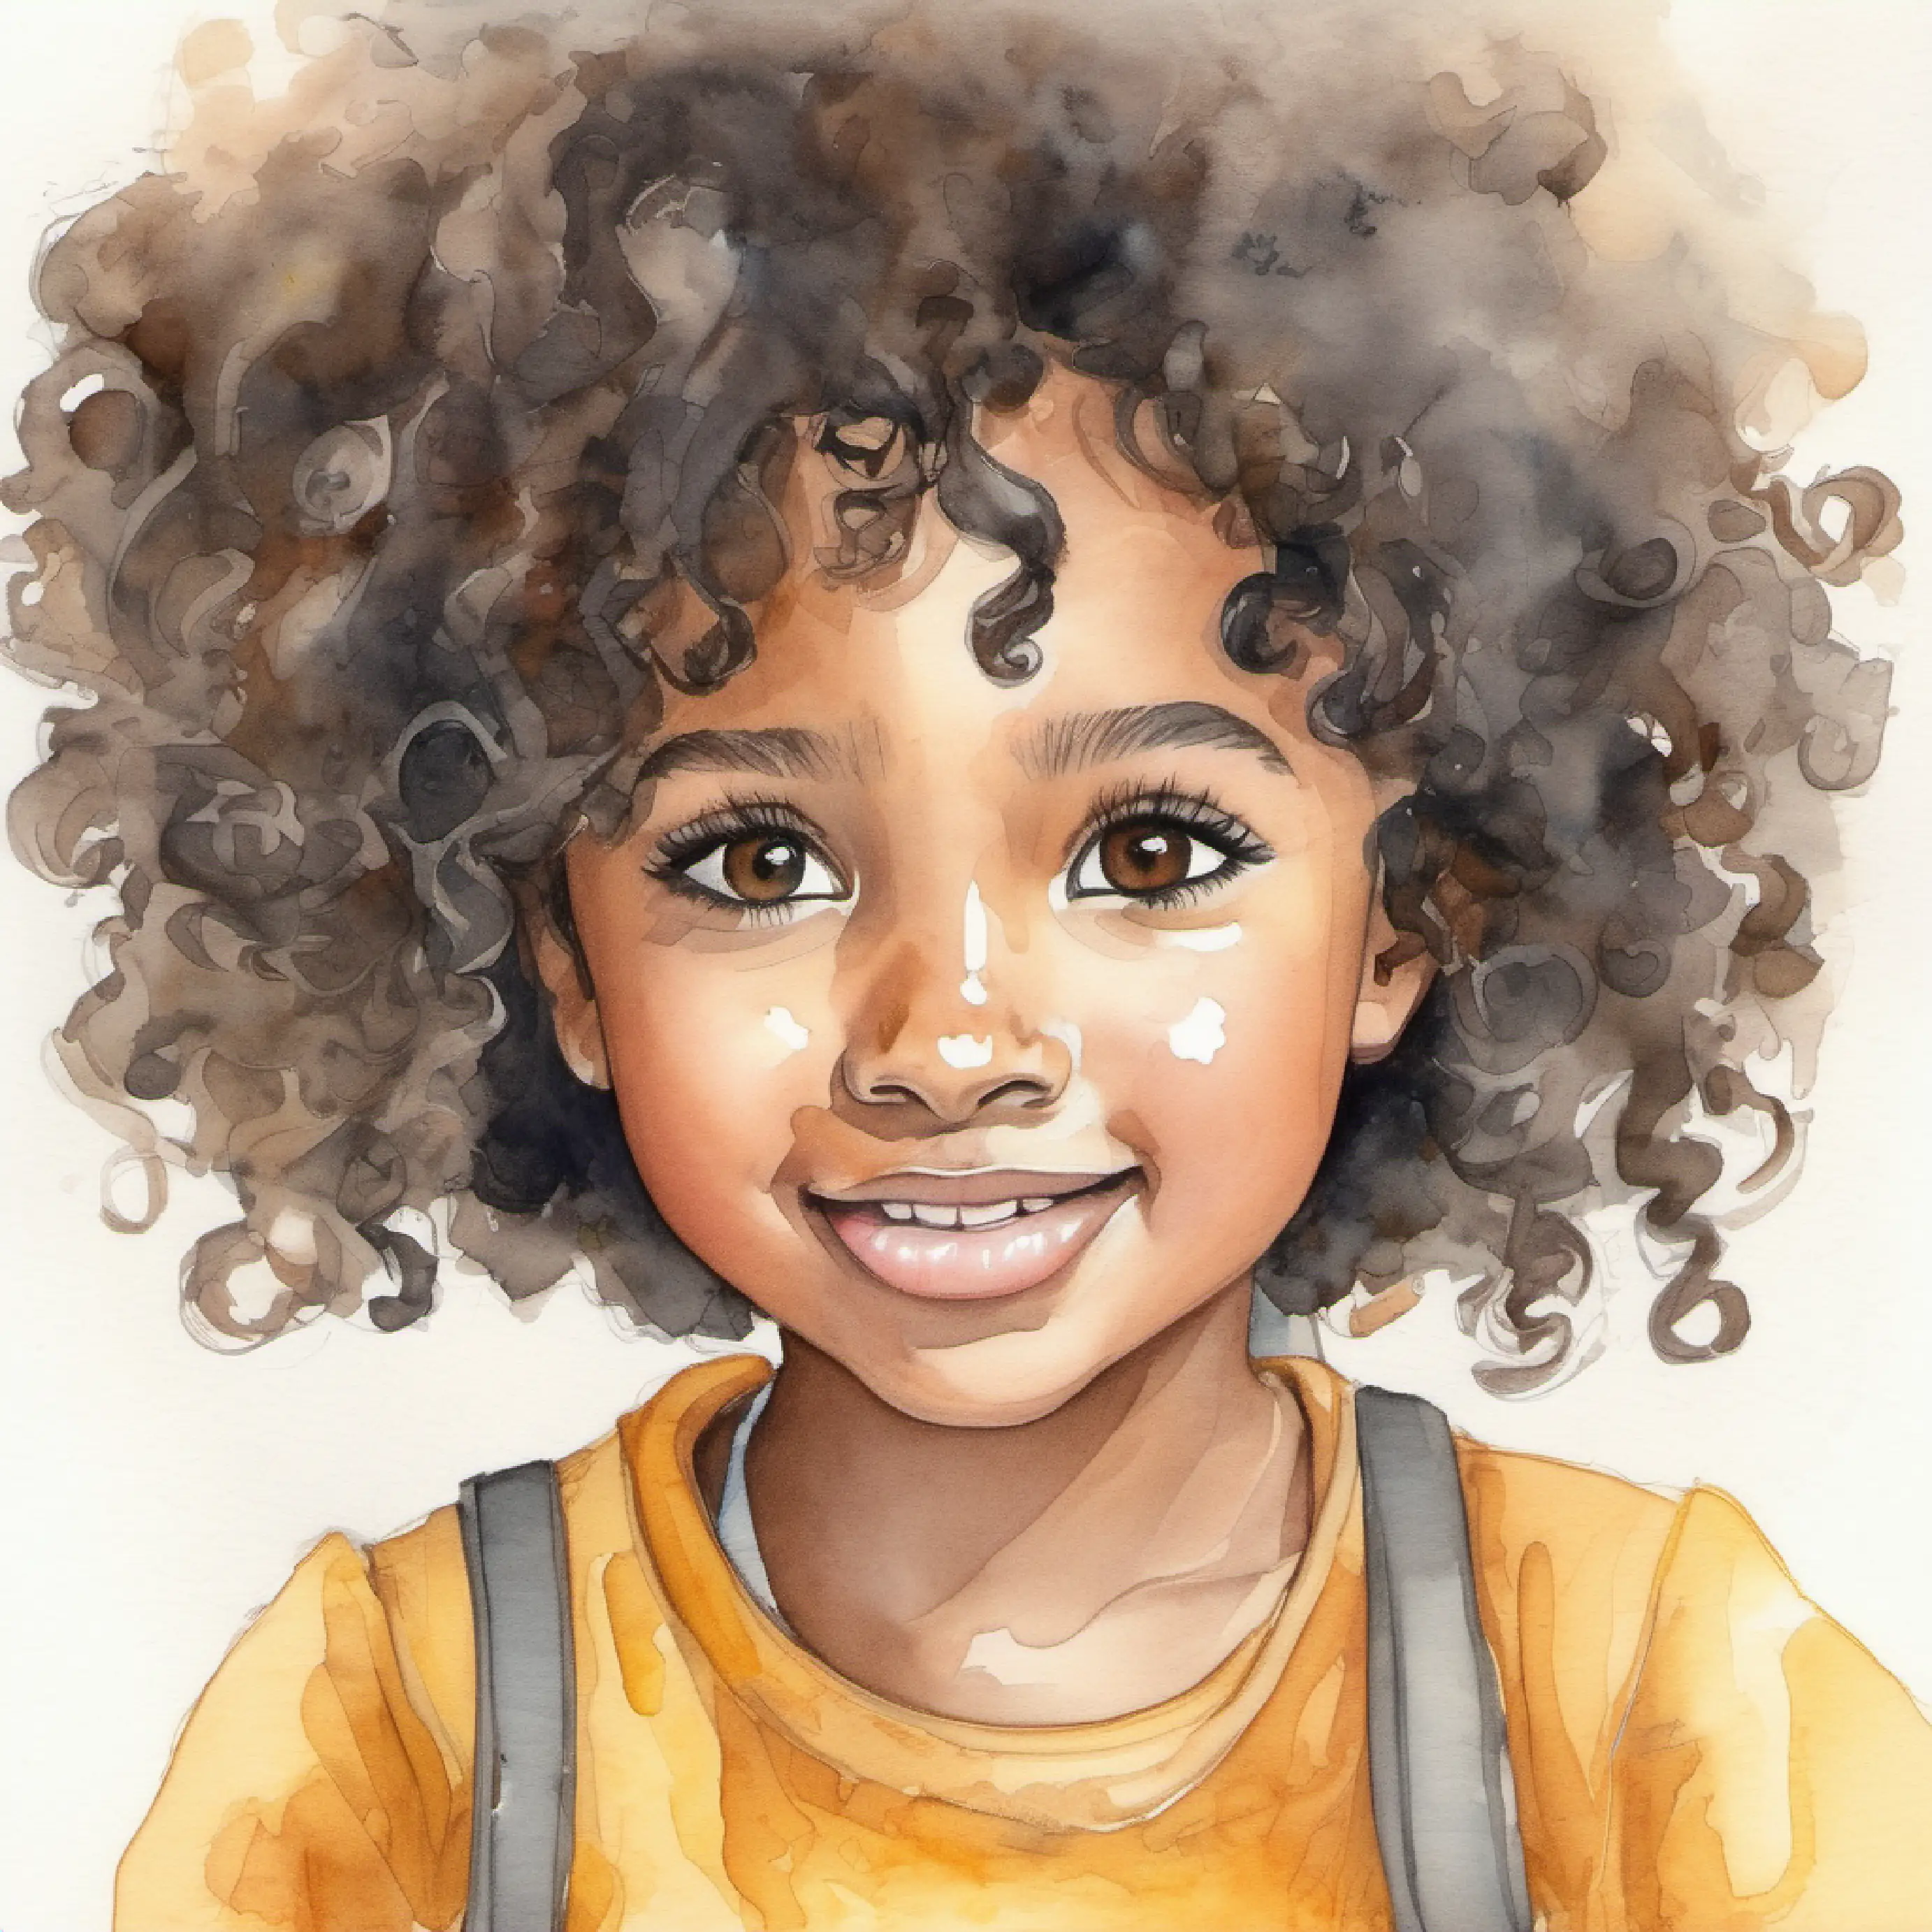 Cheerful girl, brown skin, curly black hair, big brown eyes thinking, germs near her mouth.